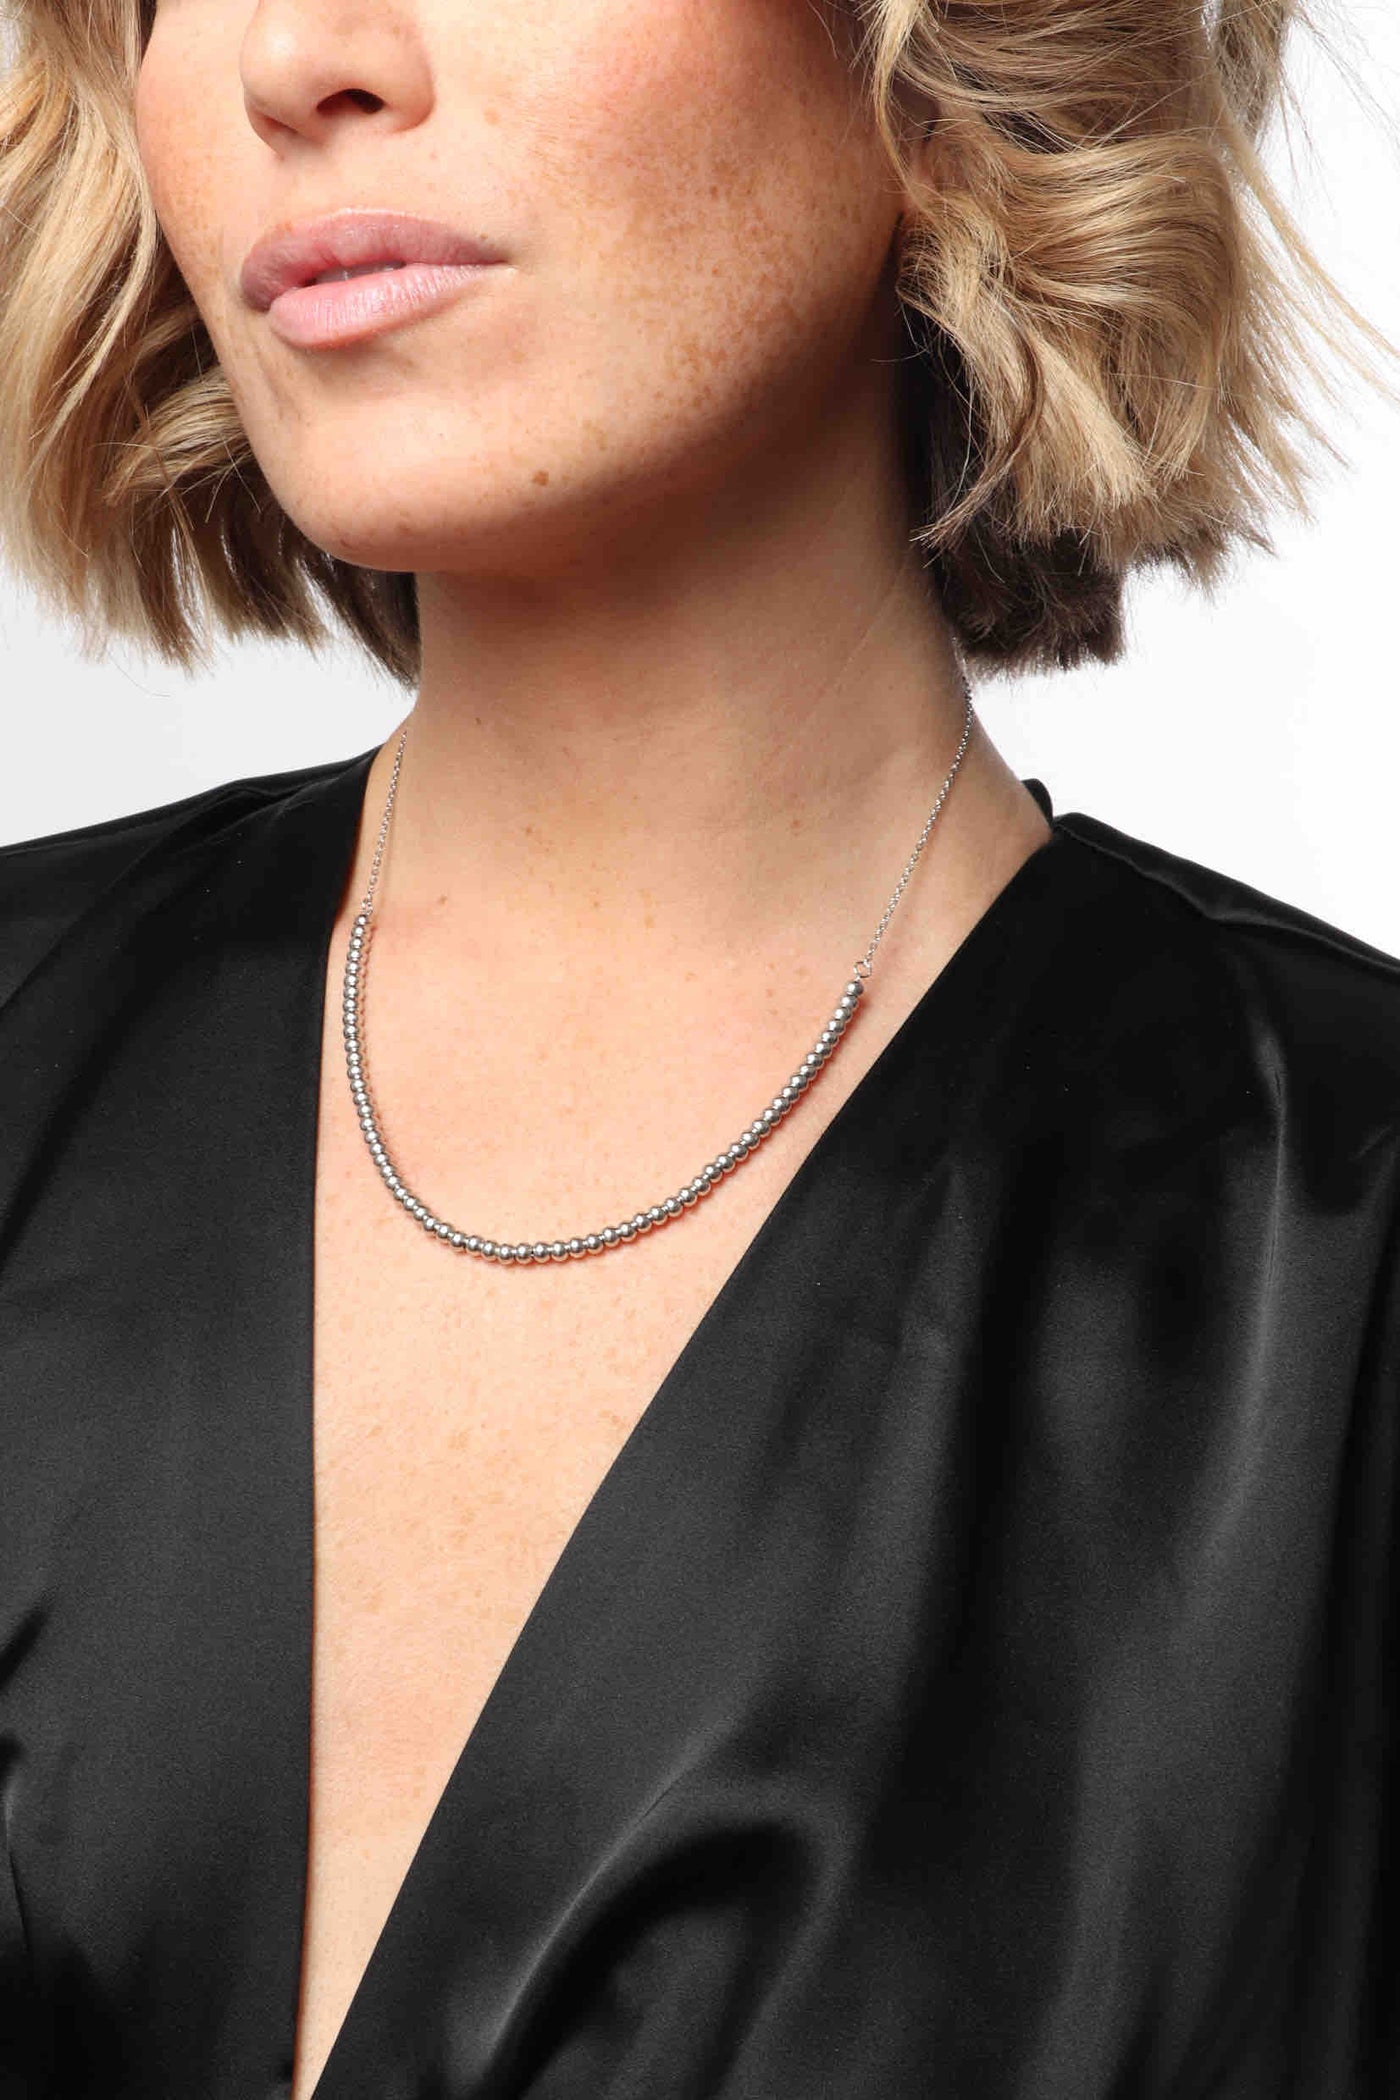 Marrin Costello wearing Marrin Costello Jewelry Crown Chain dainty dot necklace with lobster clasp closure and extender. Waterproof, sustainable, hypoallergenic. Polished stainless steel.